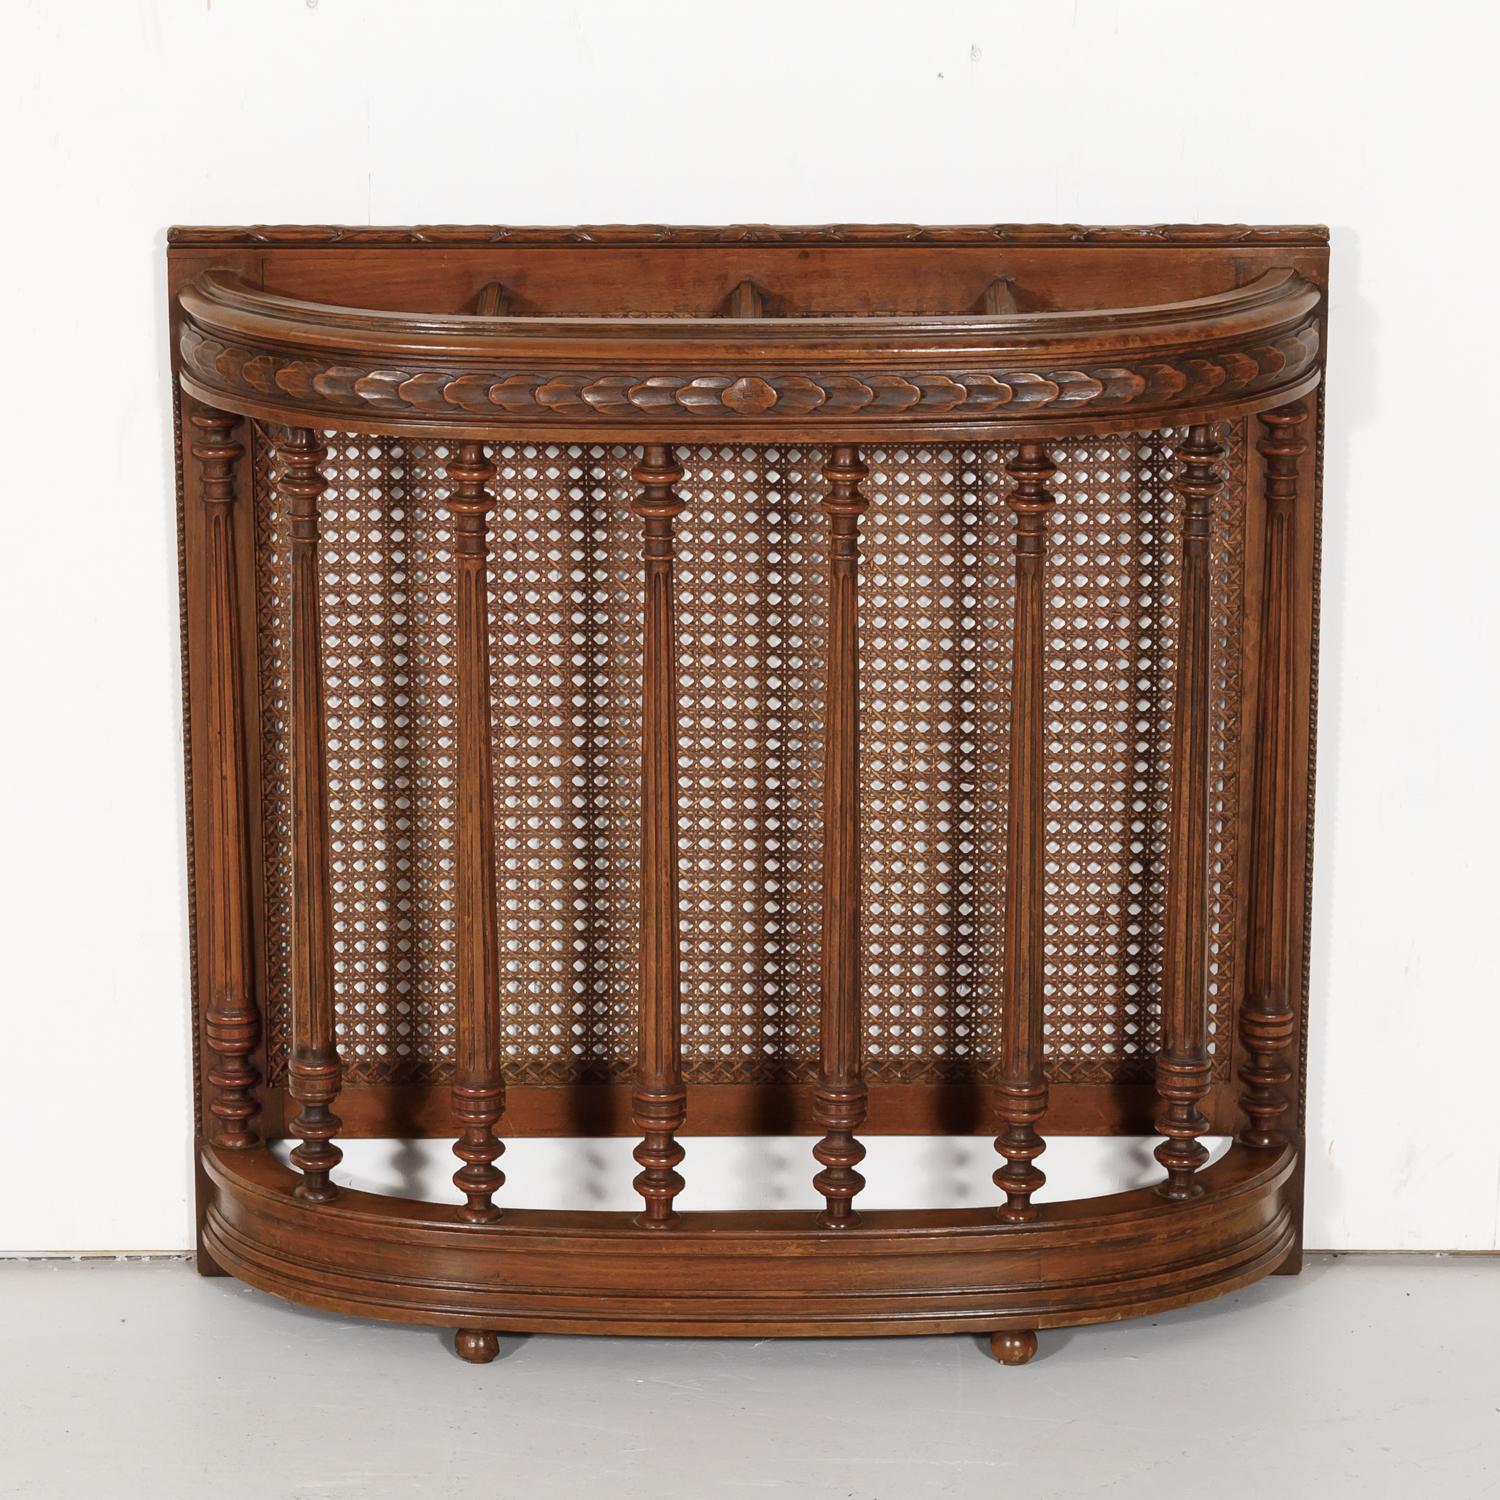 Handsome 19th century Porte-parapluie or umbrella stand handcrafted in Lyon of walnut with a cane back featuring typical neoclassical elements, circa 1890s. Made to stand against a wall, this umbrella stand is perfect for a small entry hall or mud